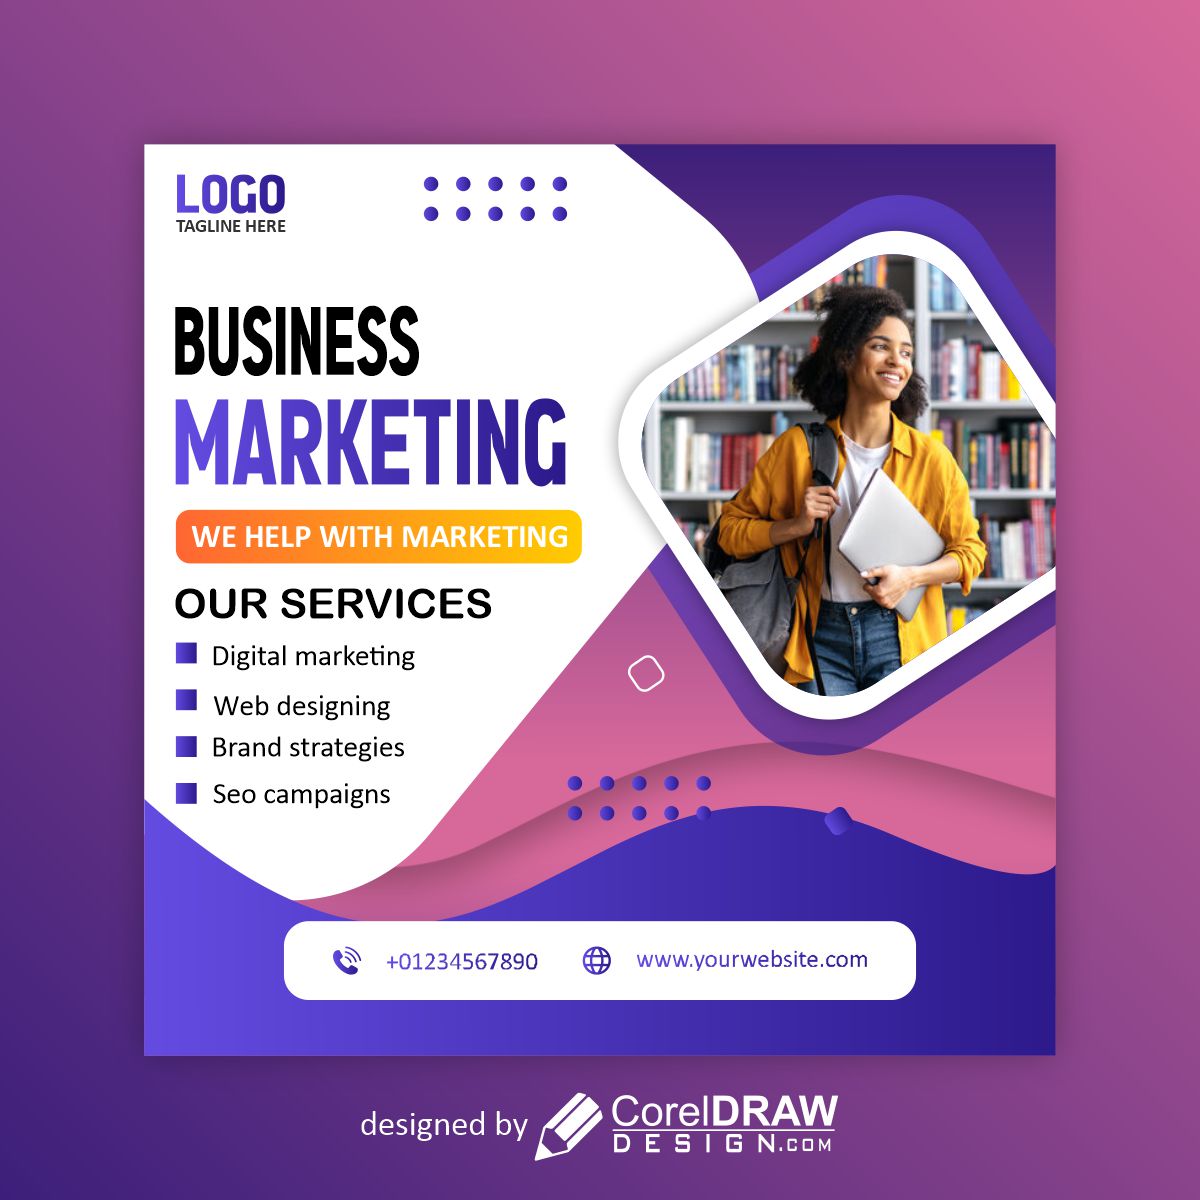 Business Marketing poster design for free